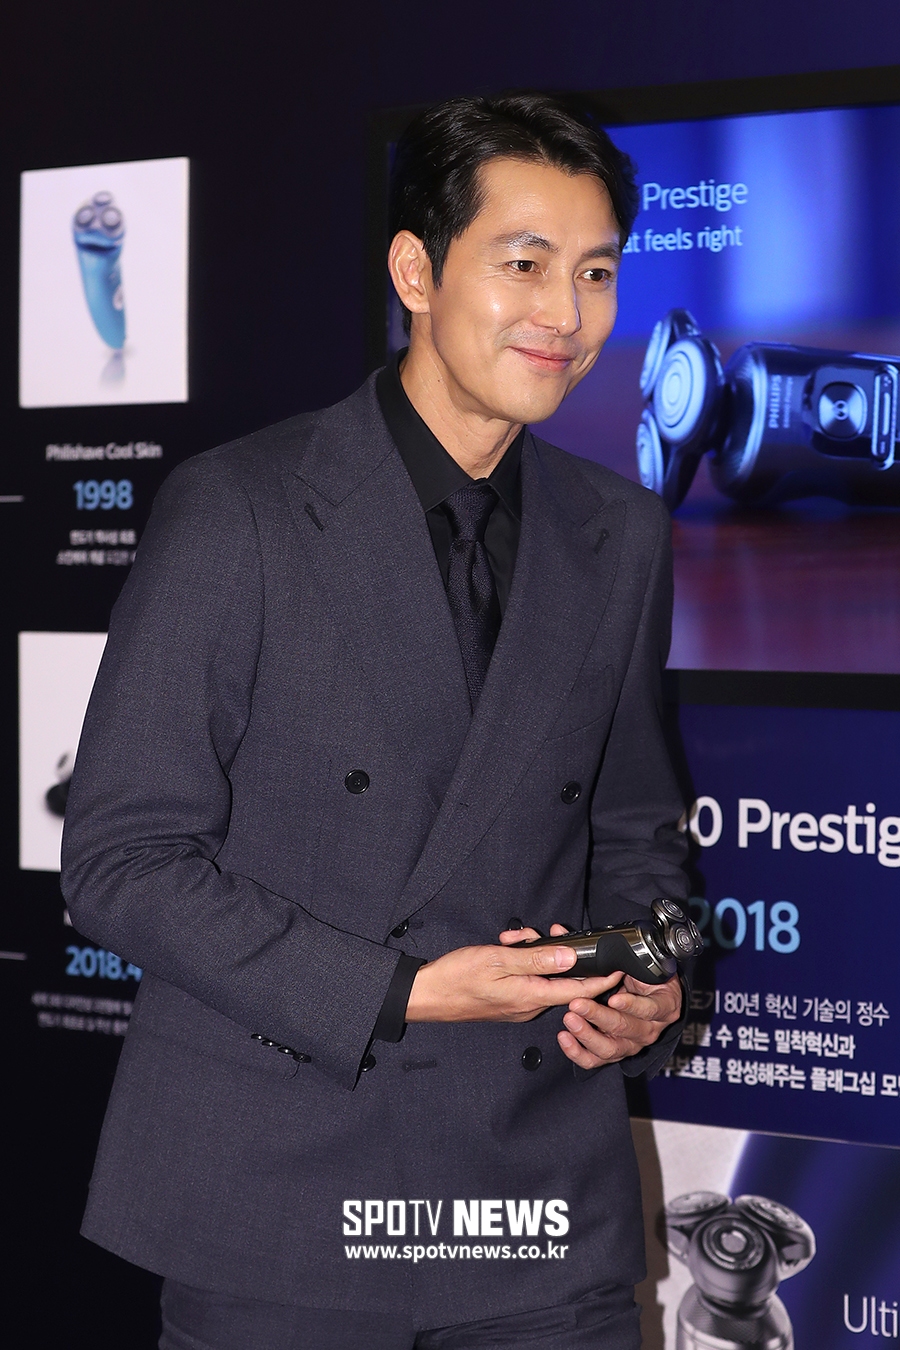 Actor Jung Woo-sung is attending the event to launch a new Philips Electric shaver at Boots UK in Sogong-dong, Jung-gu, Seoul on the morning of the 15th.